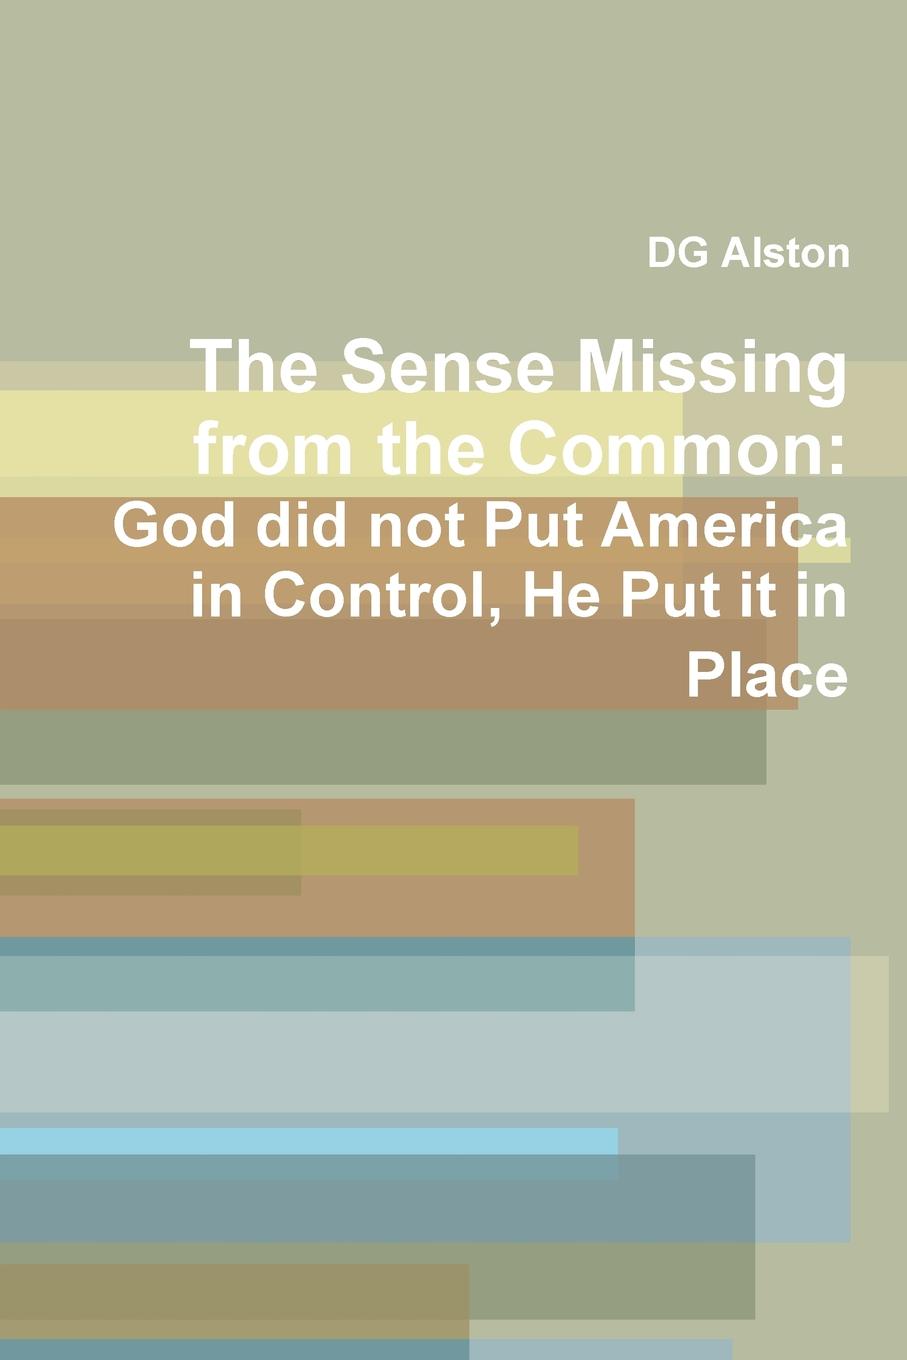 DG Alston The Sense Missing from the Common. God did not Put America in Control, He Put it in Place